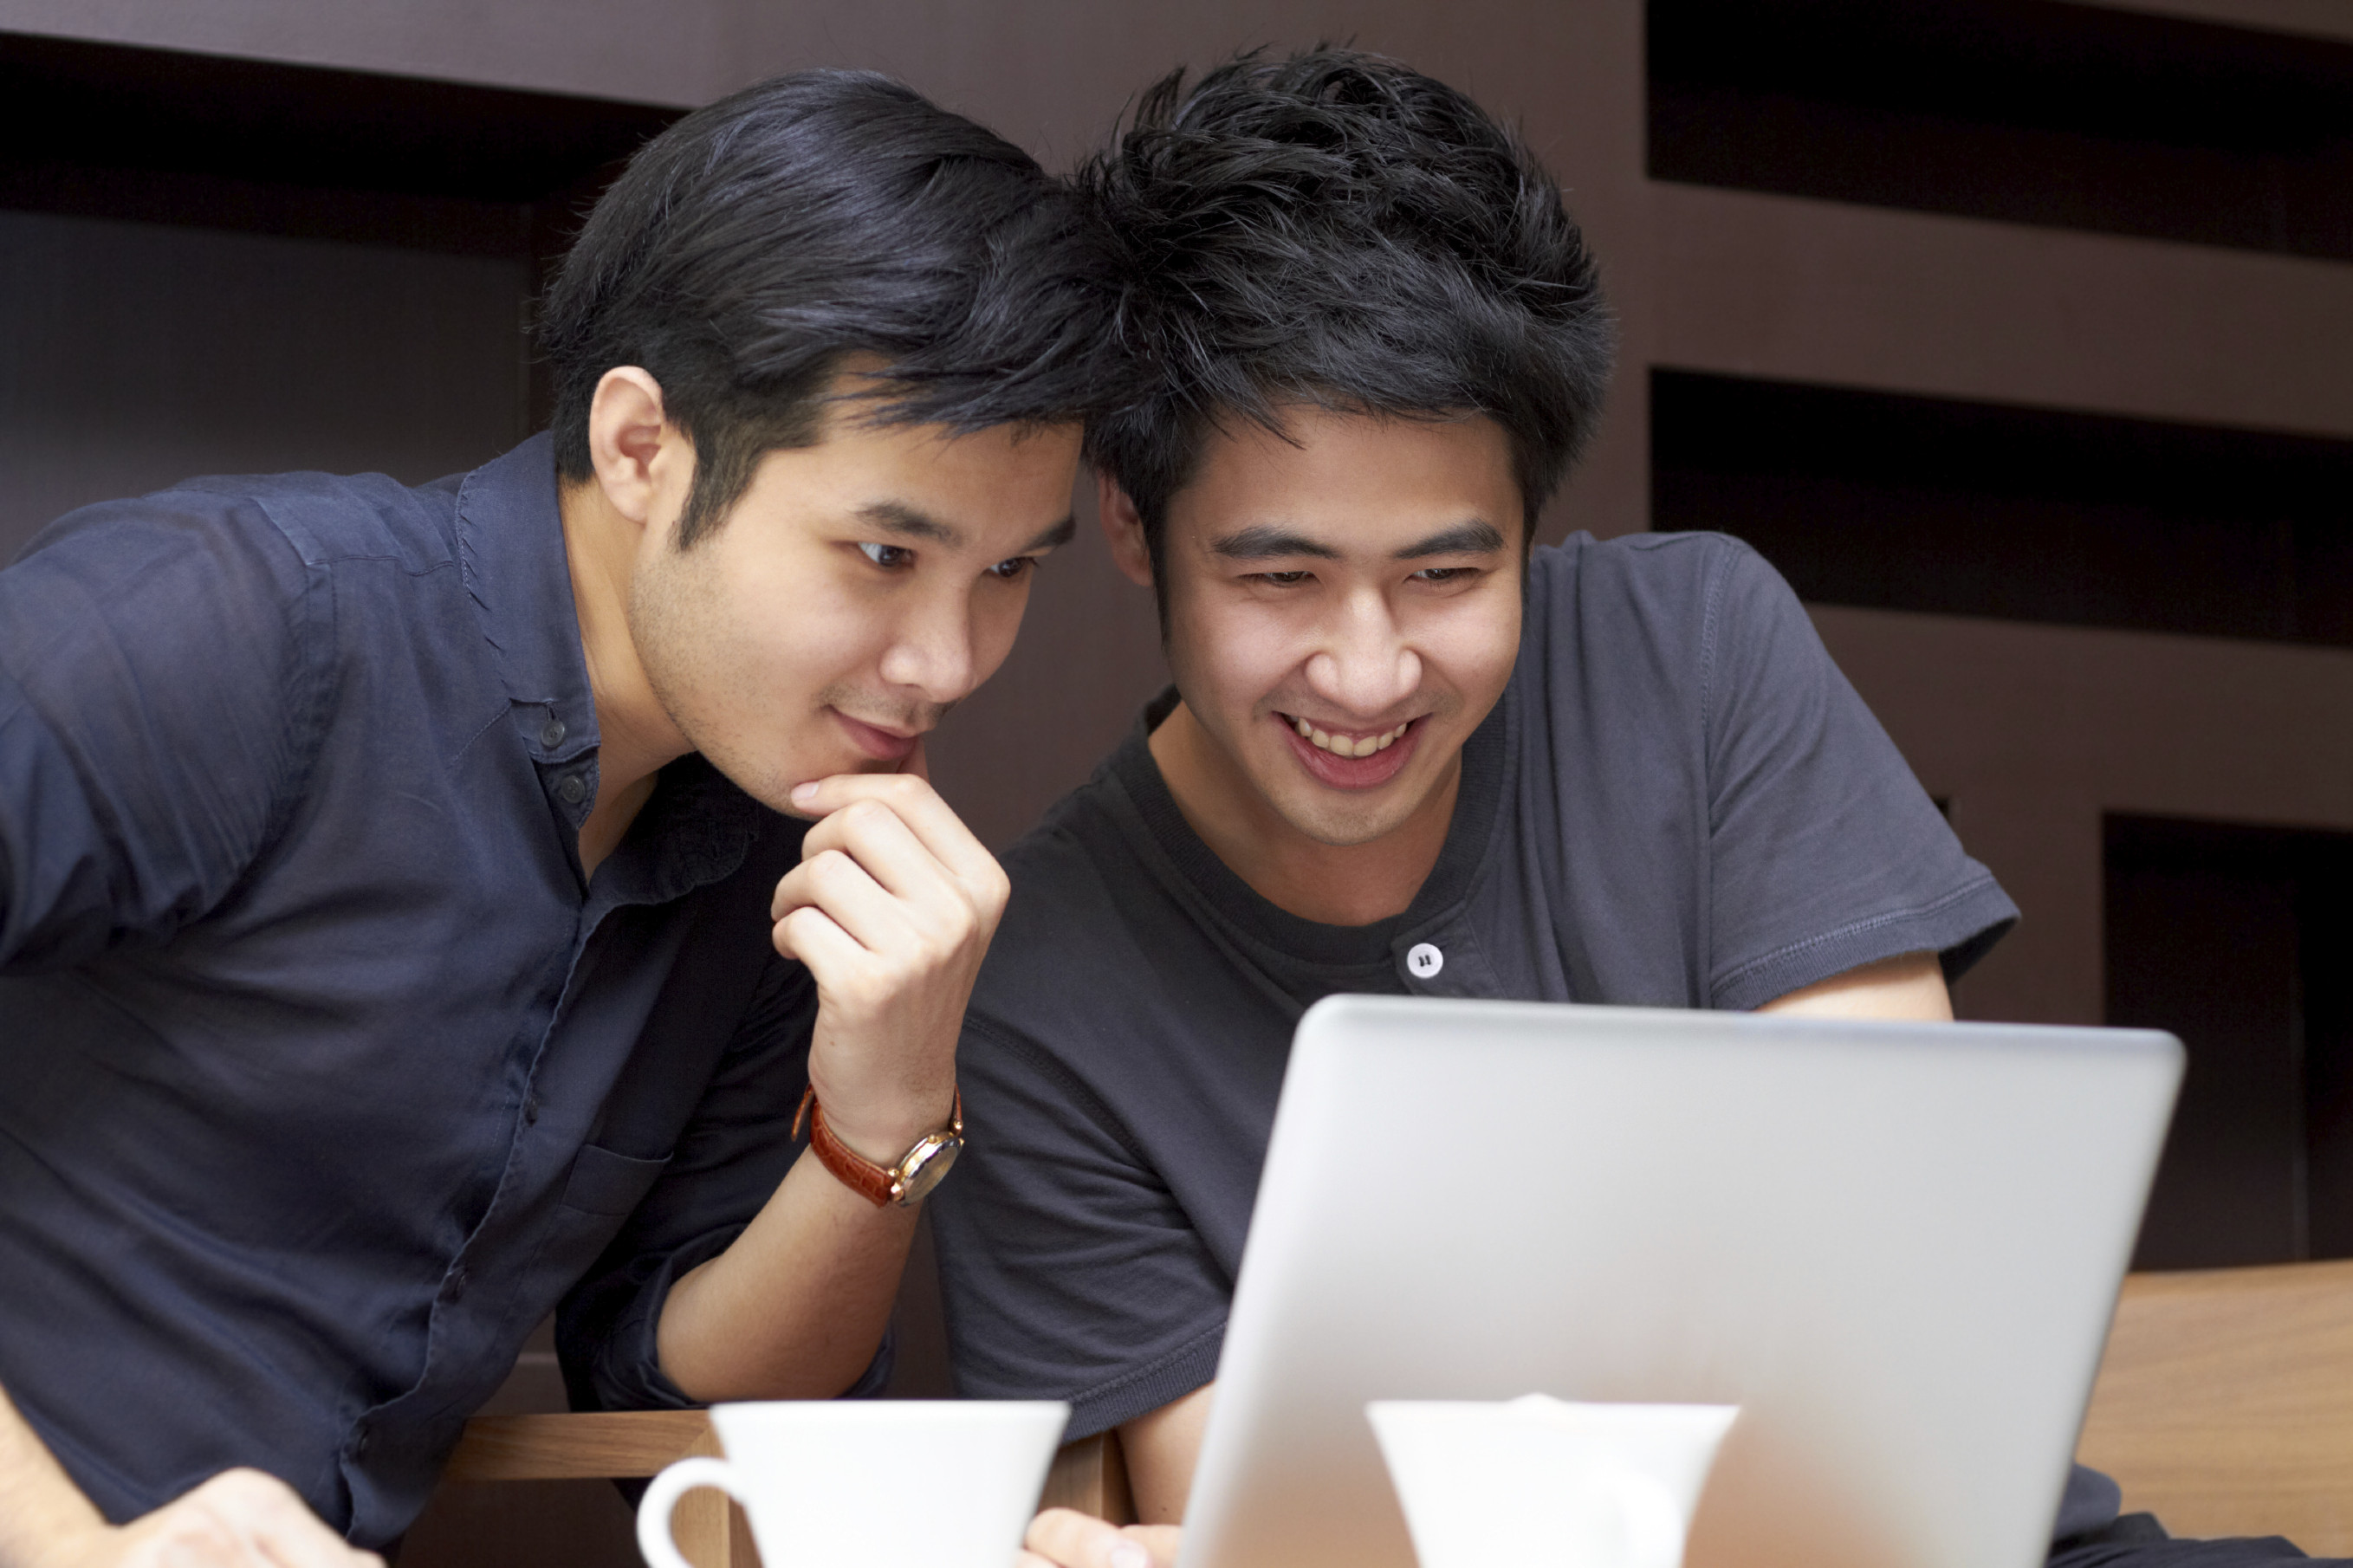 Two young men searching for jobs. File photo: iStock